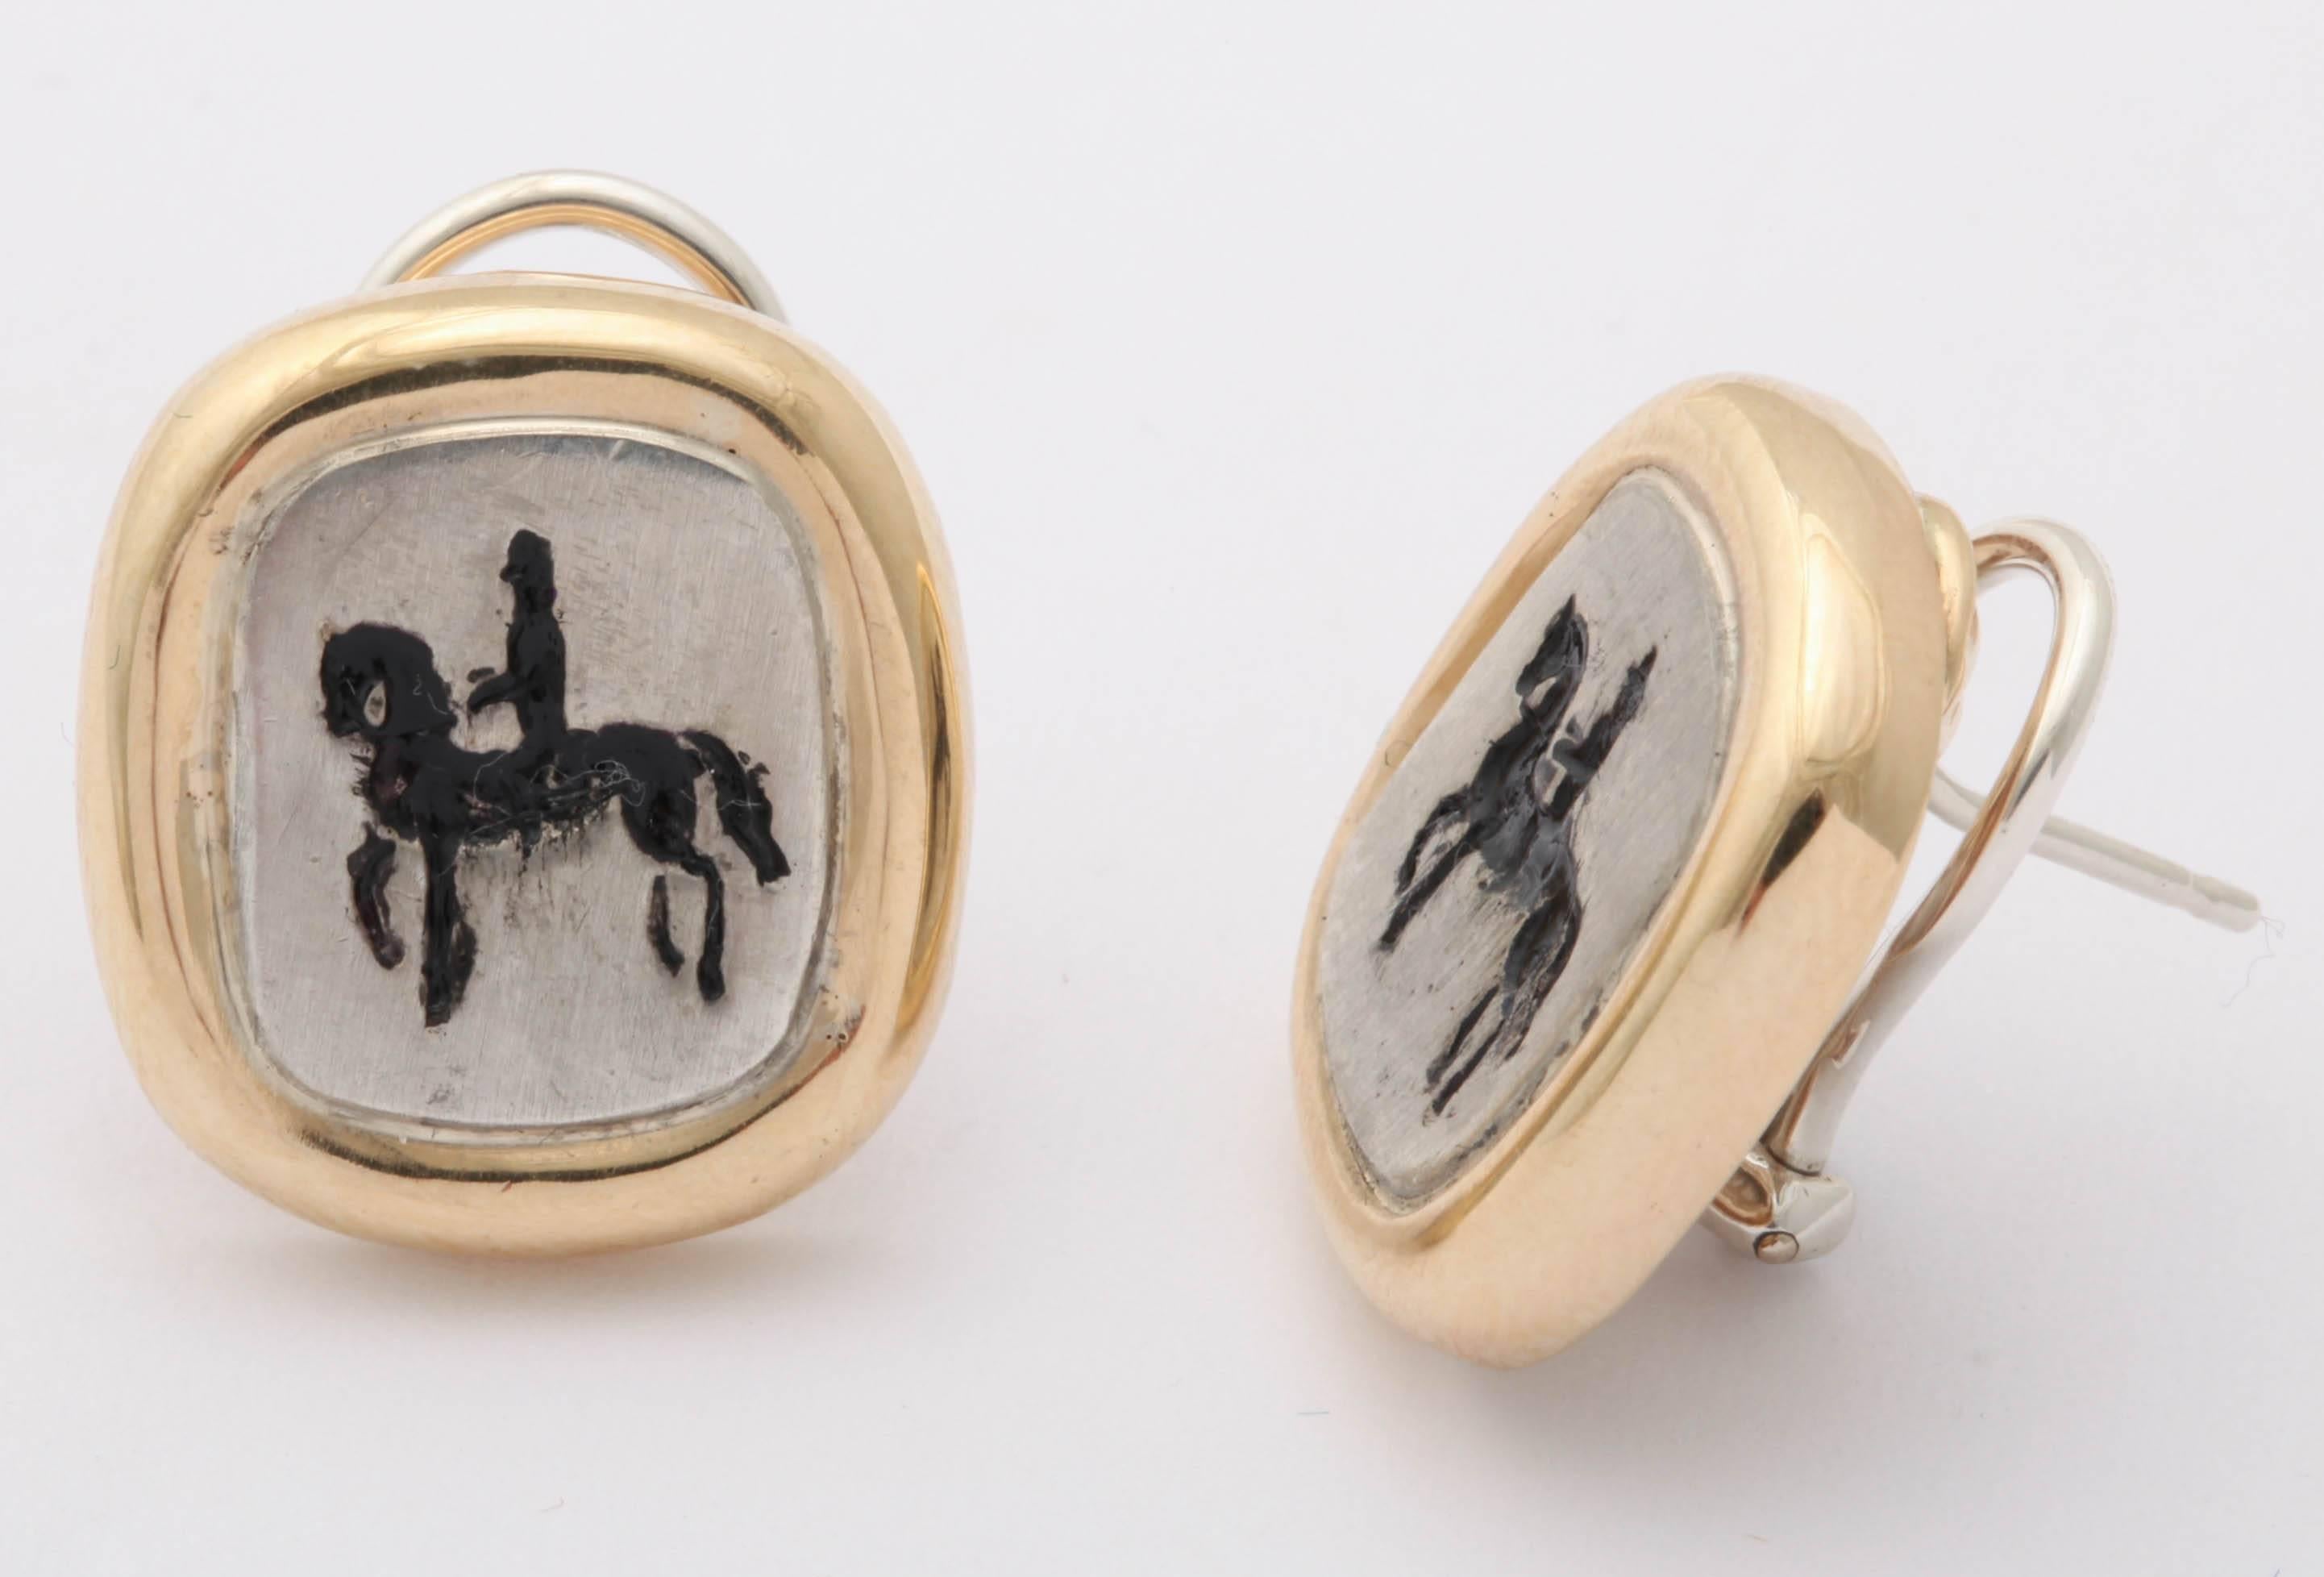 The horse and rider are engraved into the silver and oxidized for contrast. The style of riding can be dressage, Andalusian, or any other equestrian discipline where the horse prances as though it were dancing. The surround is 18 kt yellow gold and